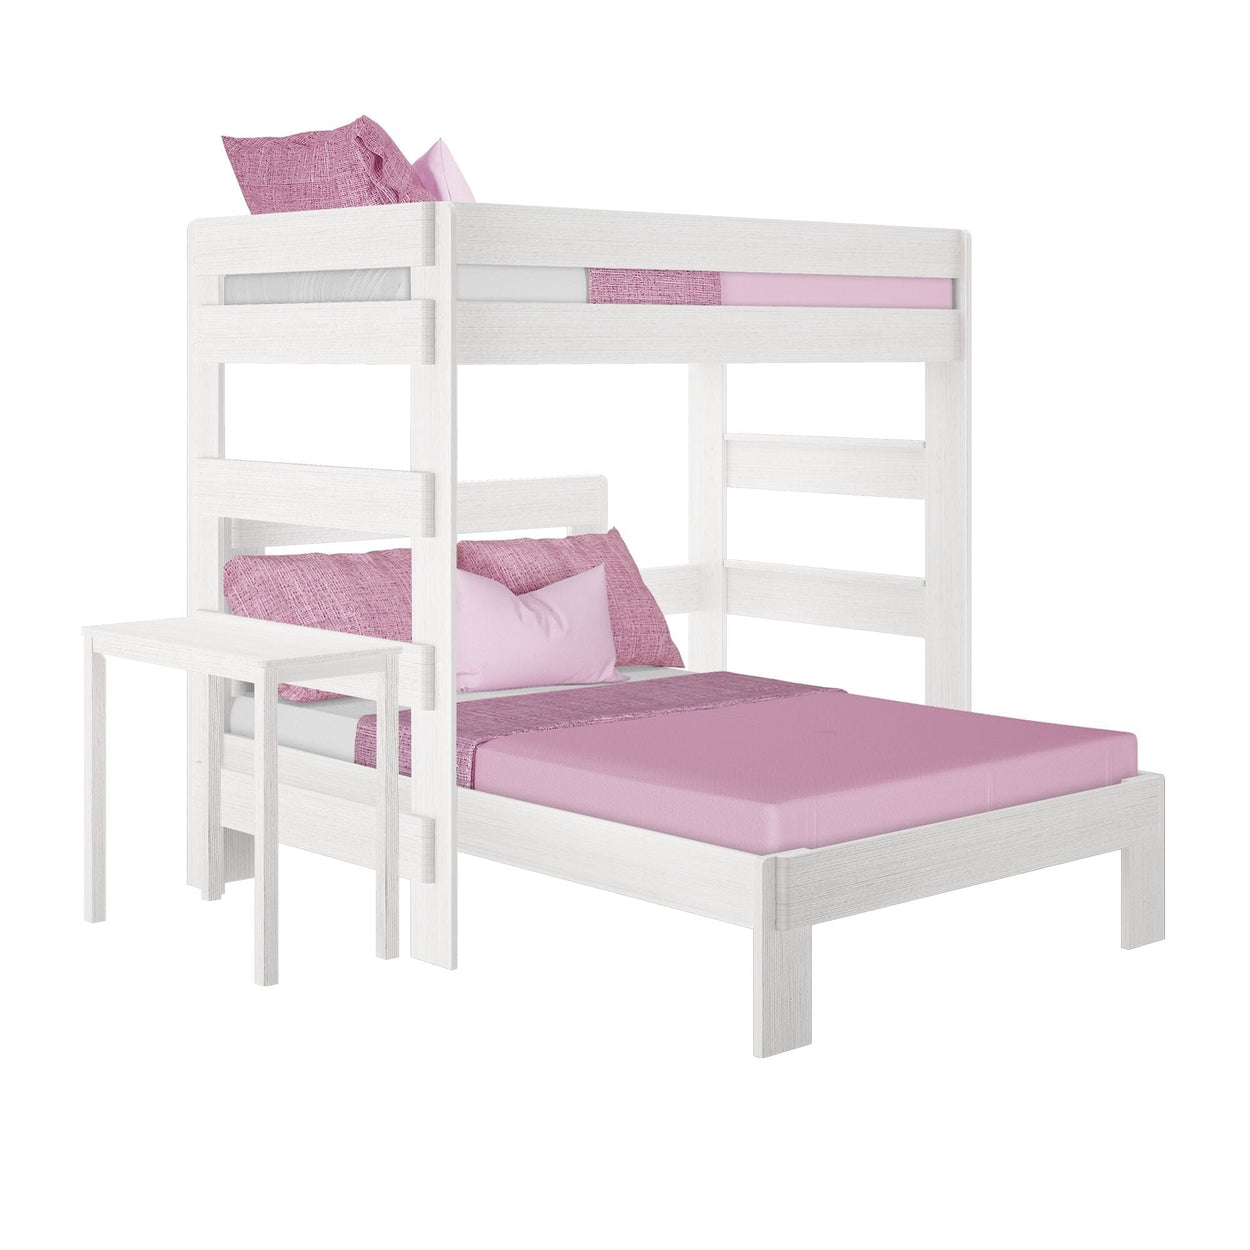 19-802-182 : Bunk Beds Farmhouse Twin over Full L-Shaped Bunk Bed with Desk, White Wash